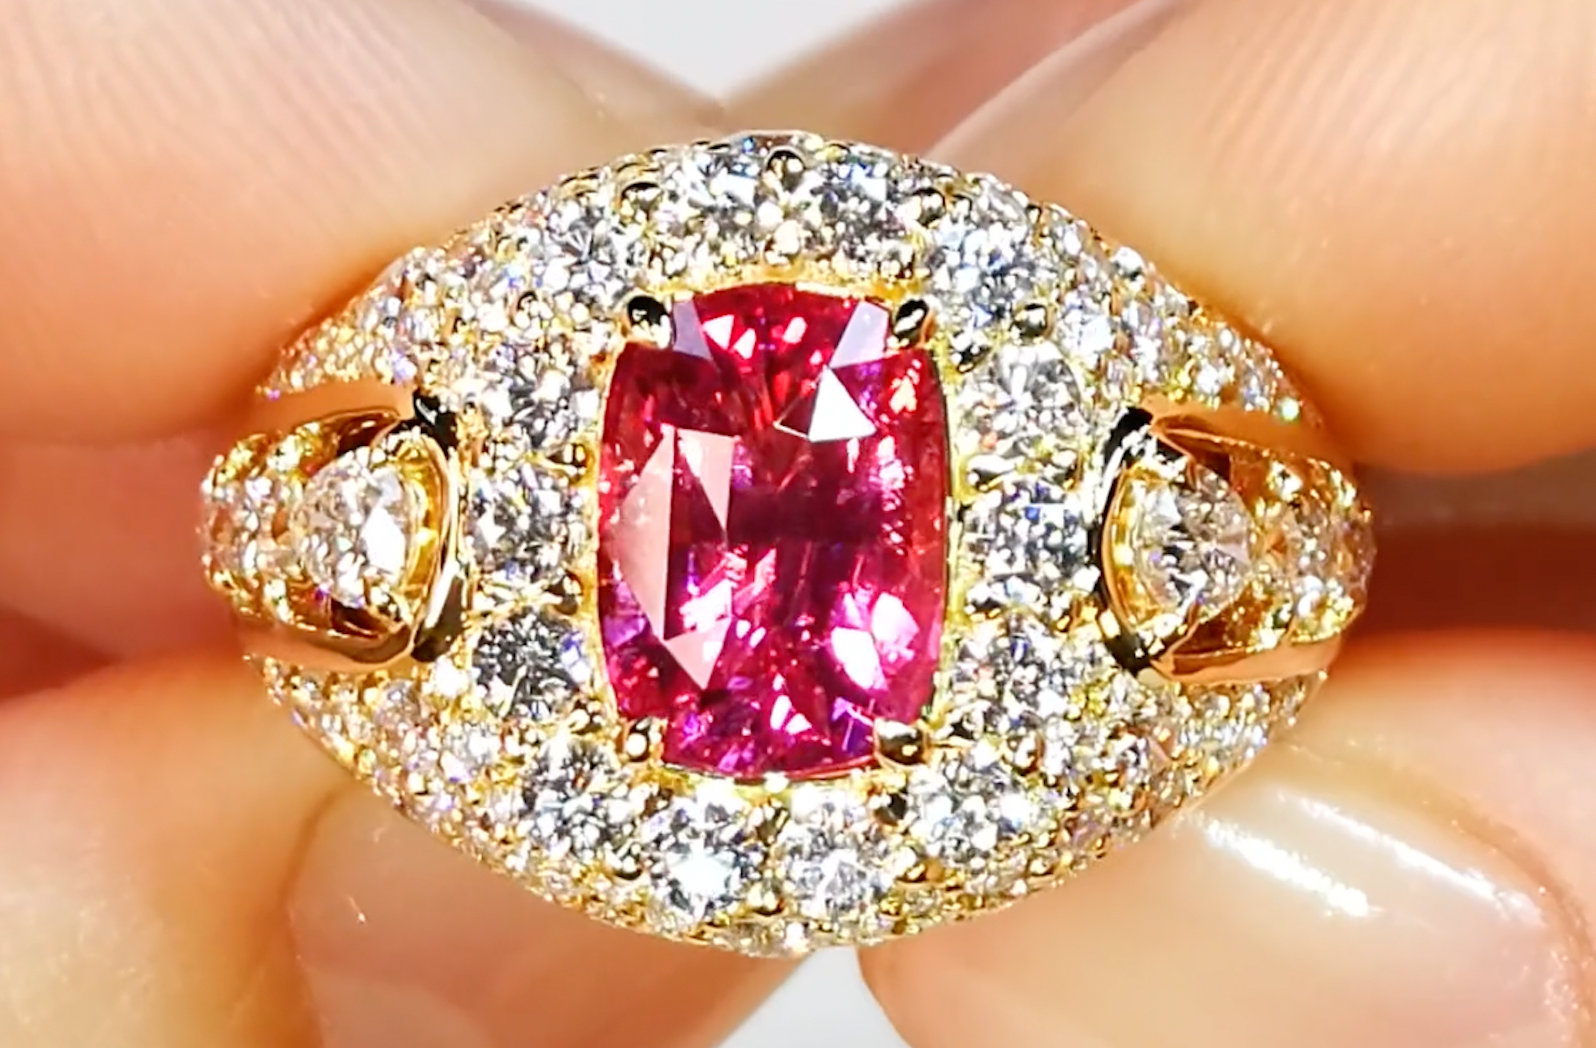 Burmese Jedi Spinel Ring with D Flawless Diamonds set in 18K Yellow Gold